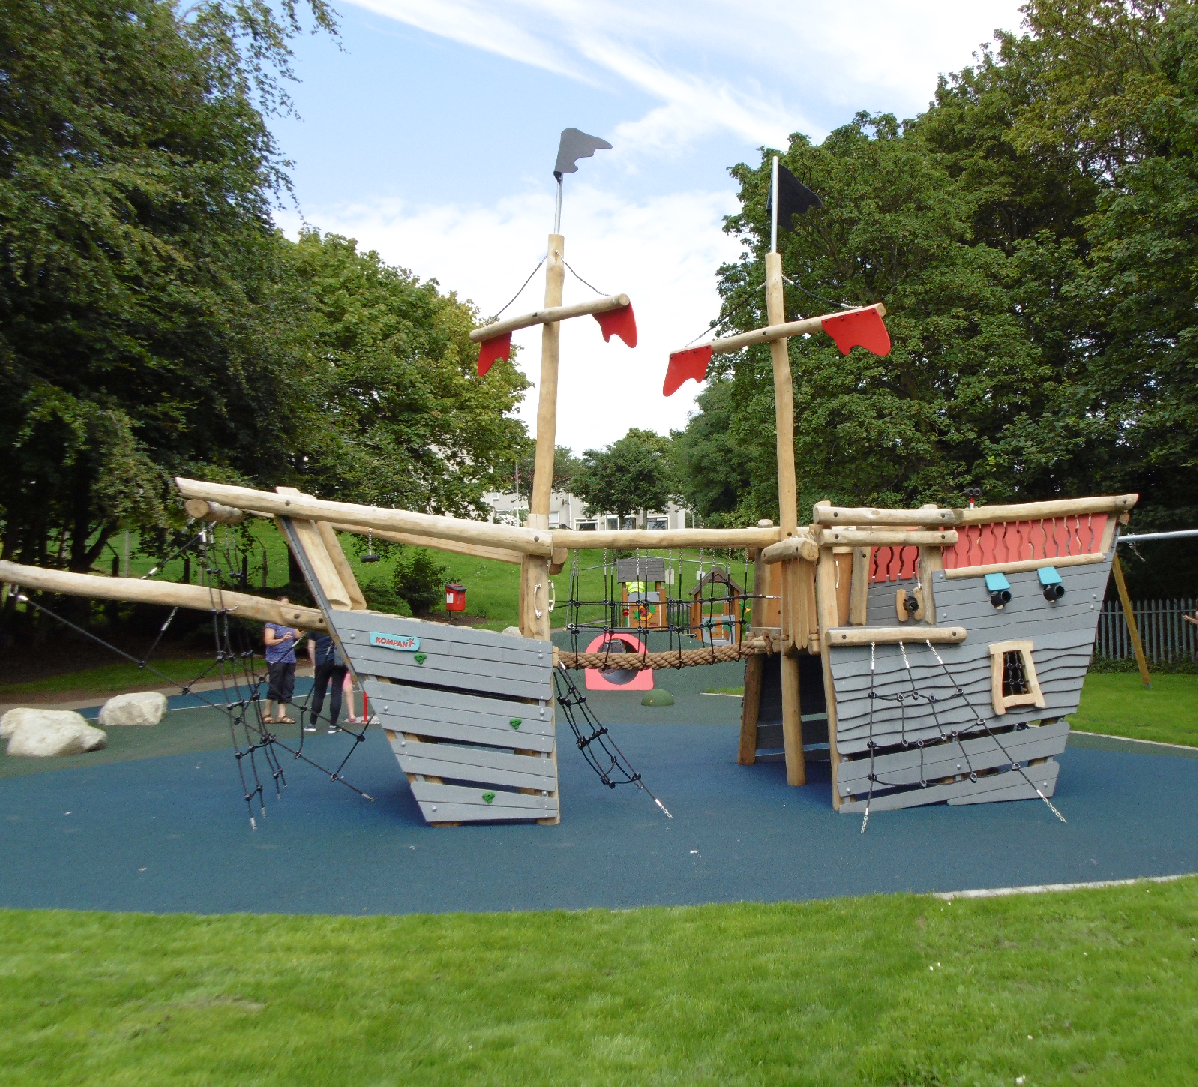 Boat image of play equipment at Nethergate Play Park